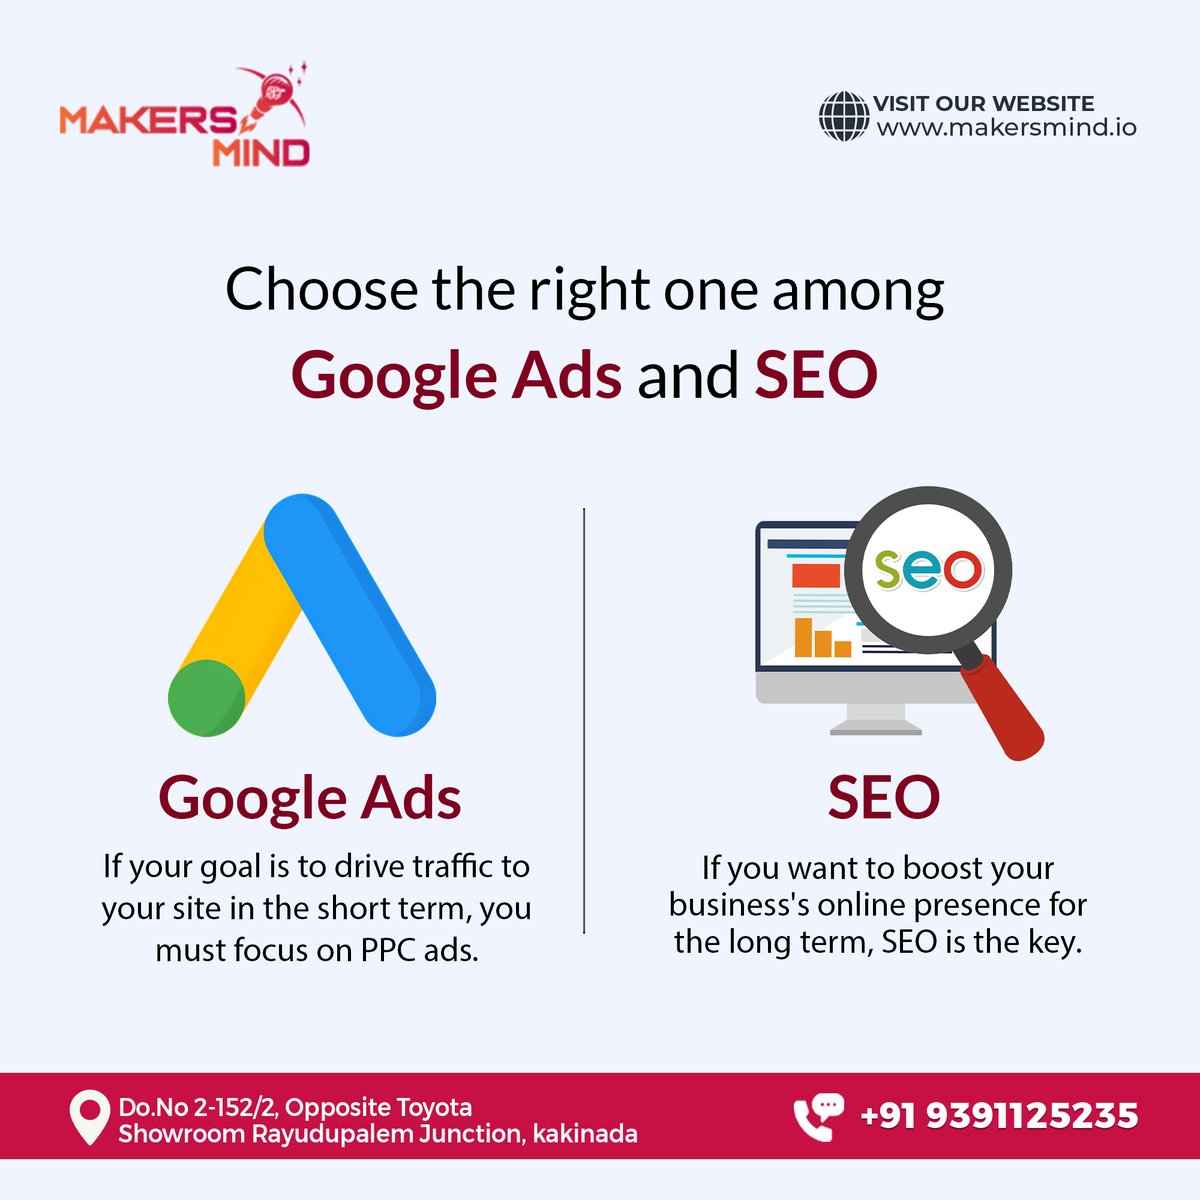 The choice between Google Ads and SEO isn't easy. Google Ads offers immediate visibility, while SEO builds lasting credibility over time.
.
don't hesitate we will guide you!
.
Contact: 9391125235
Visit us at:makersmind.io
.
#seo #googleads #onlinepresence #organicreach